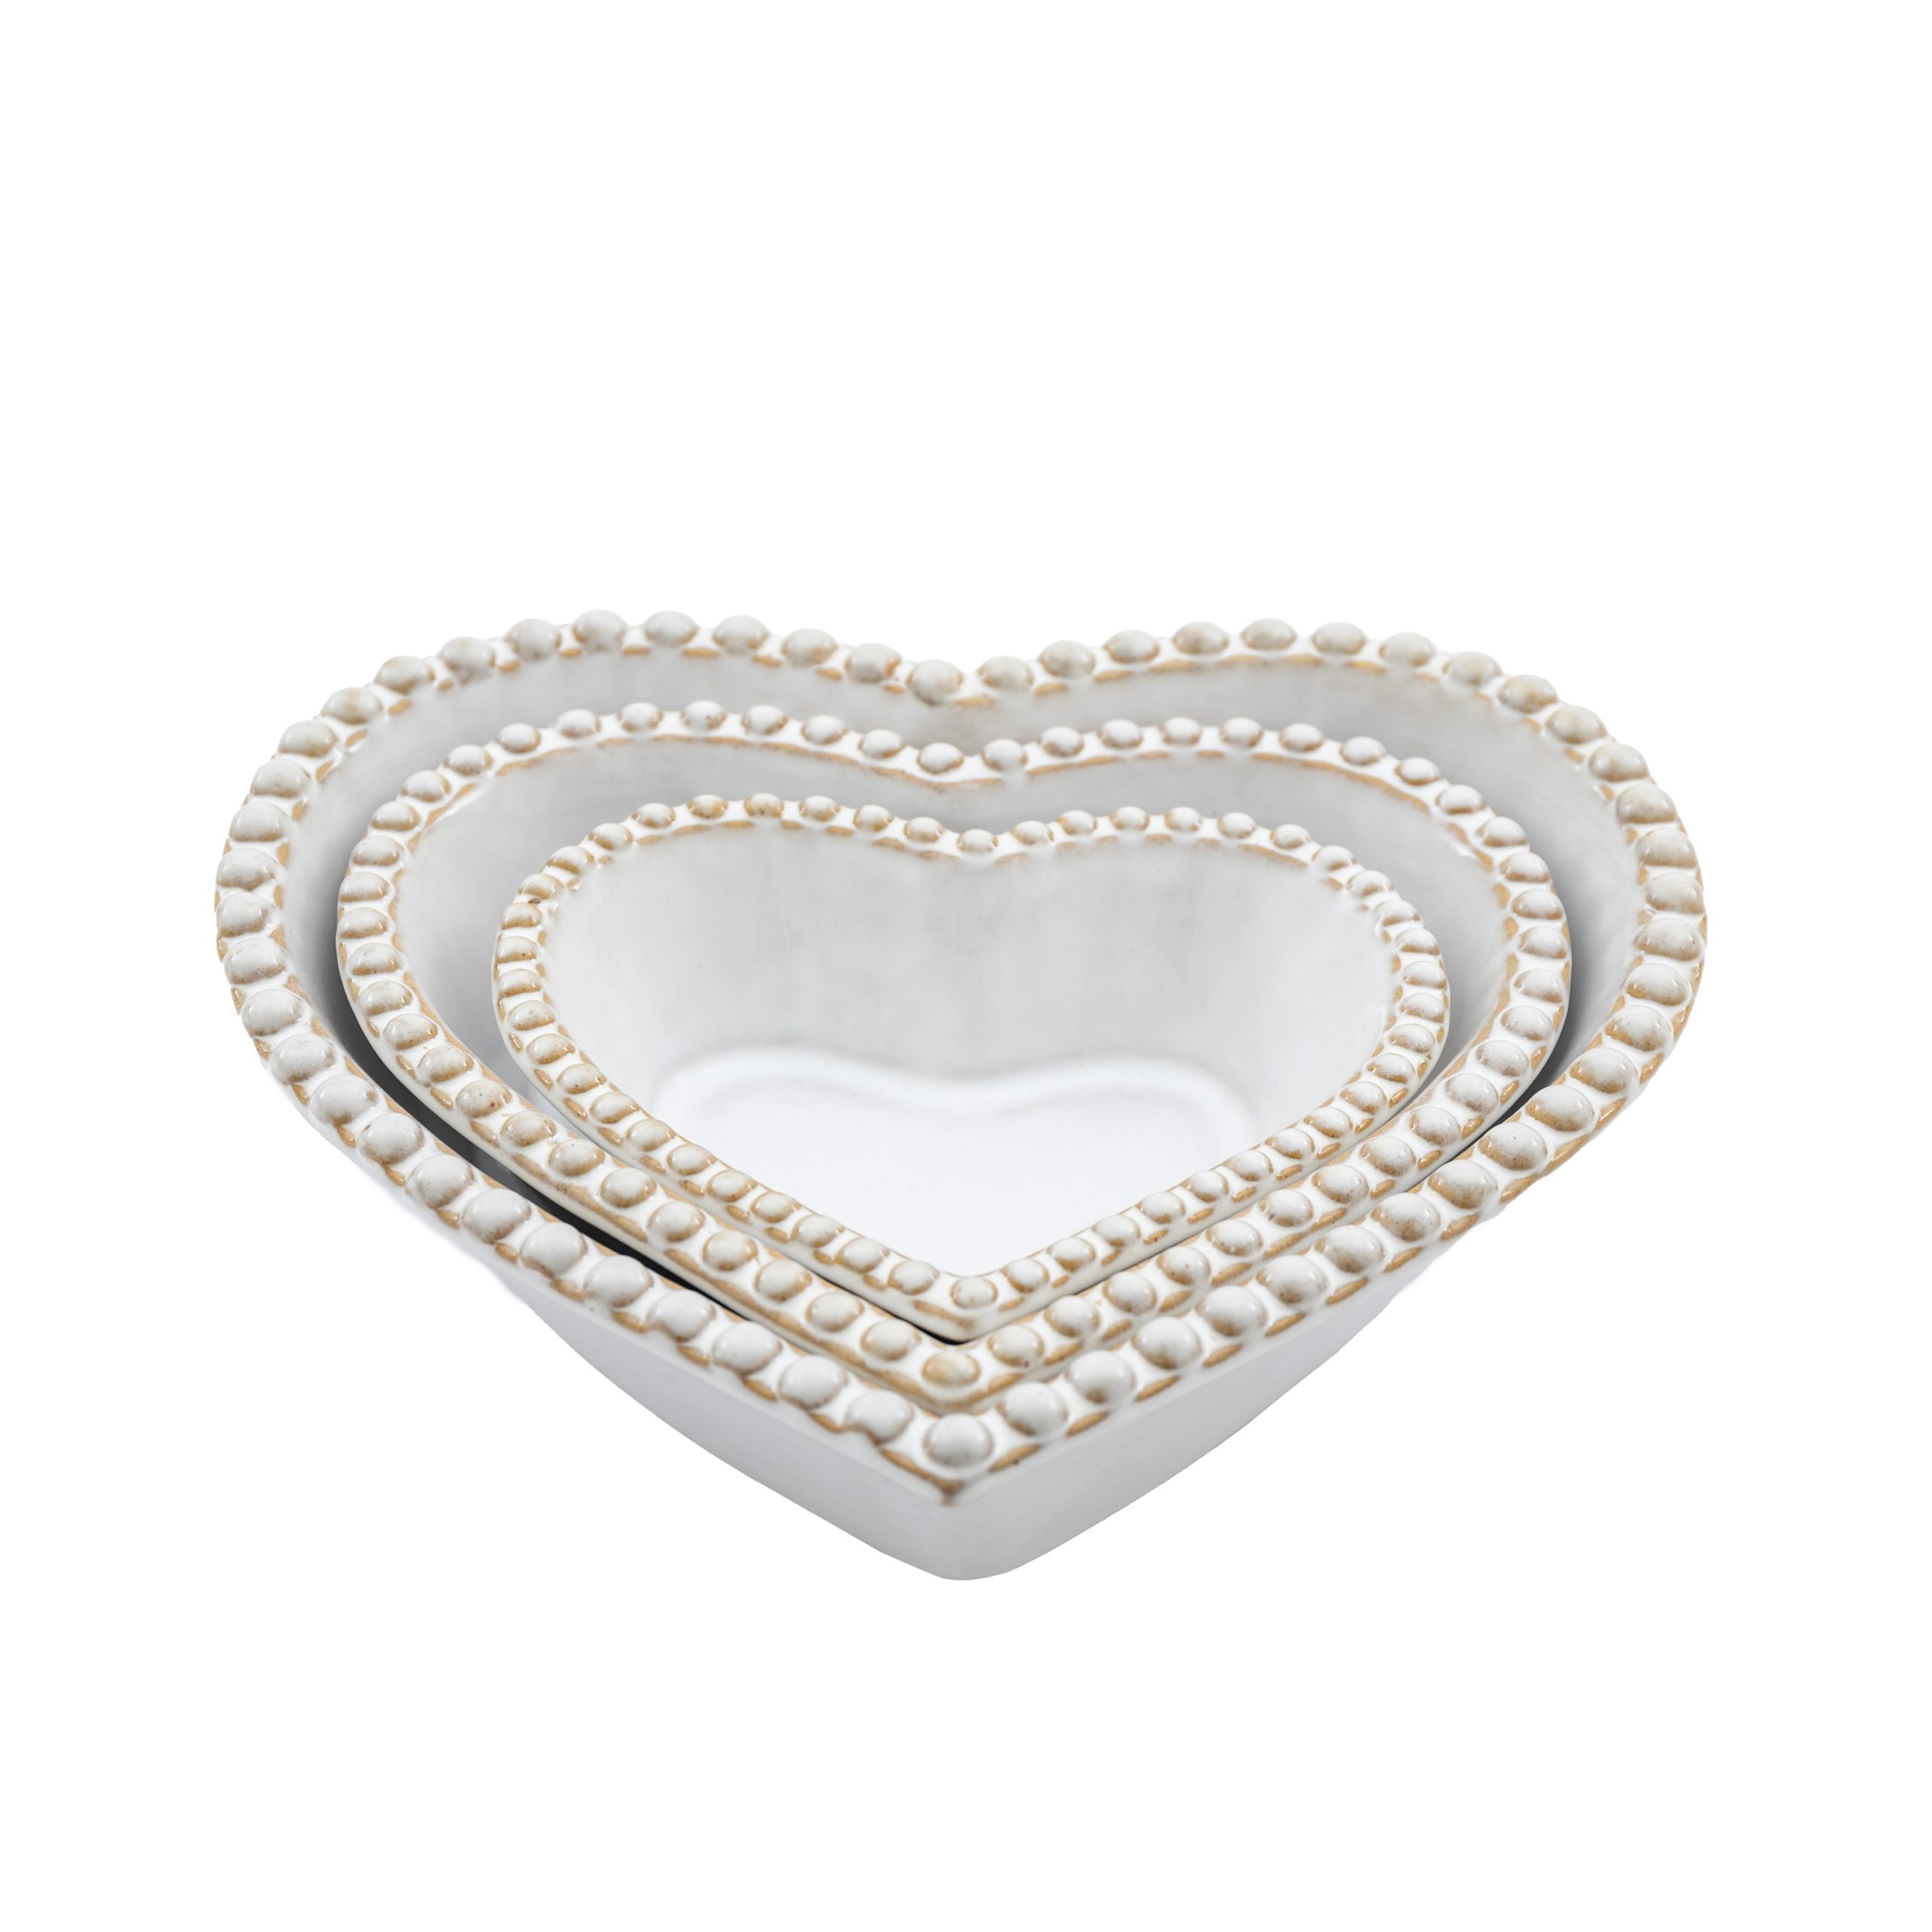 Gallery Direct Beaded Heart Bowl (Set of 3)